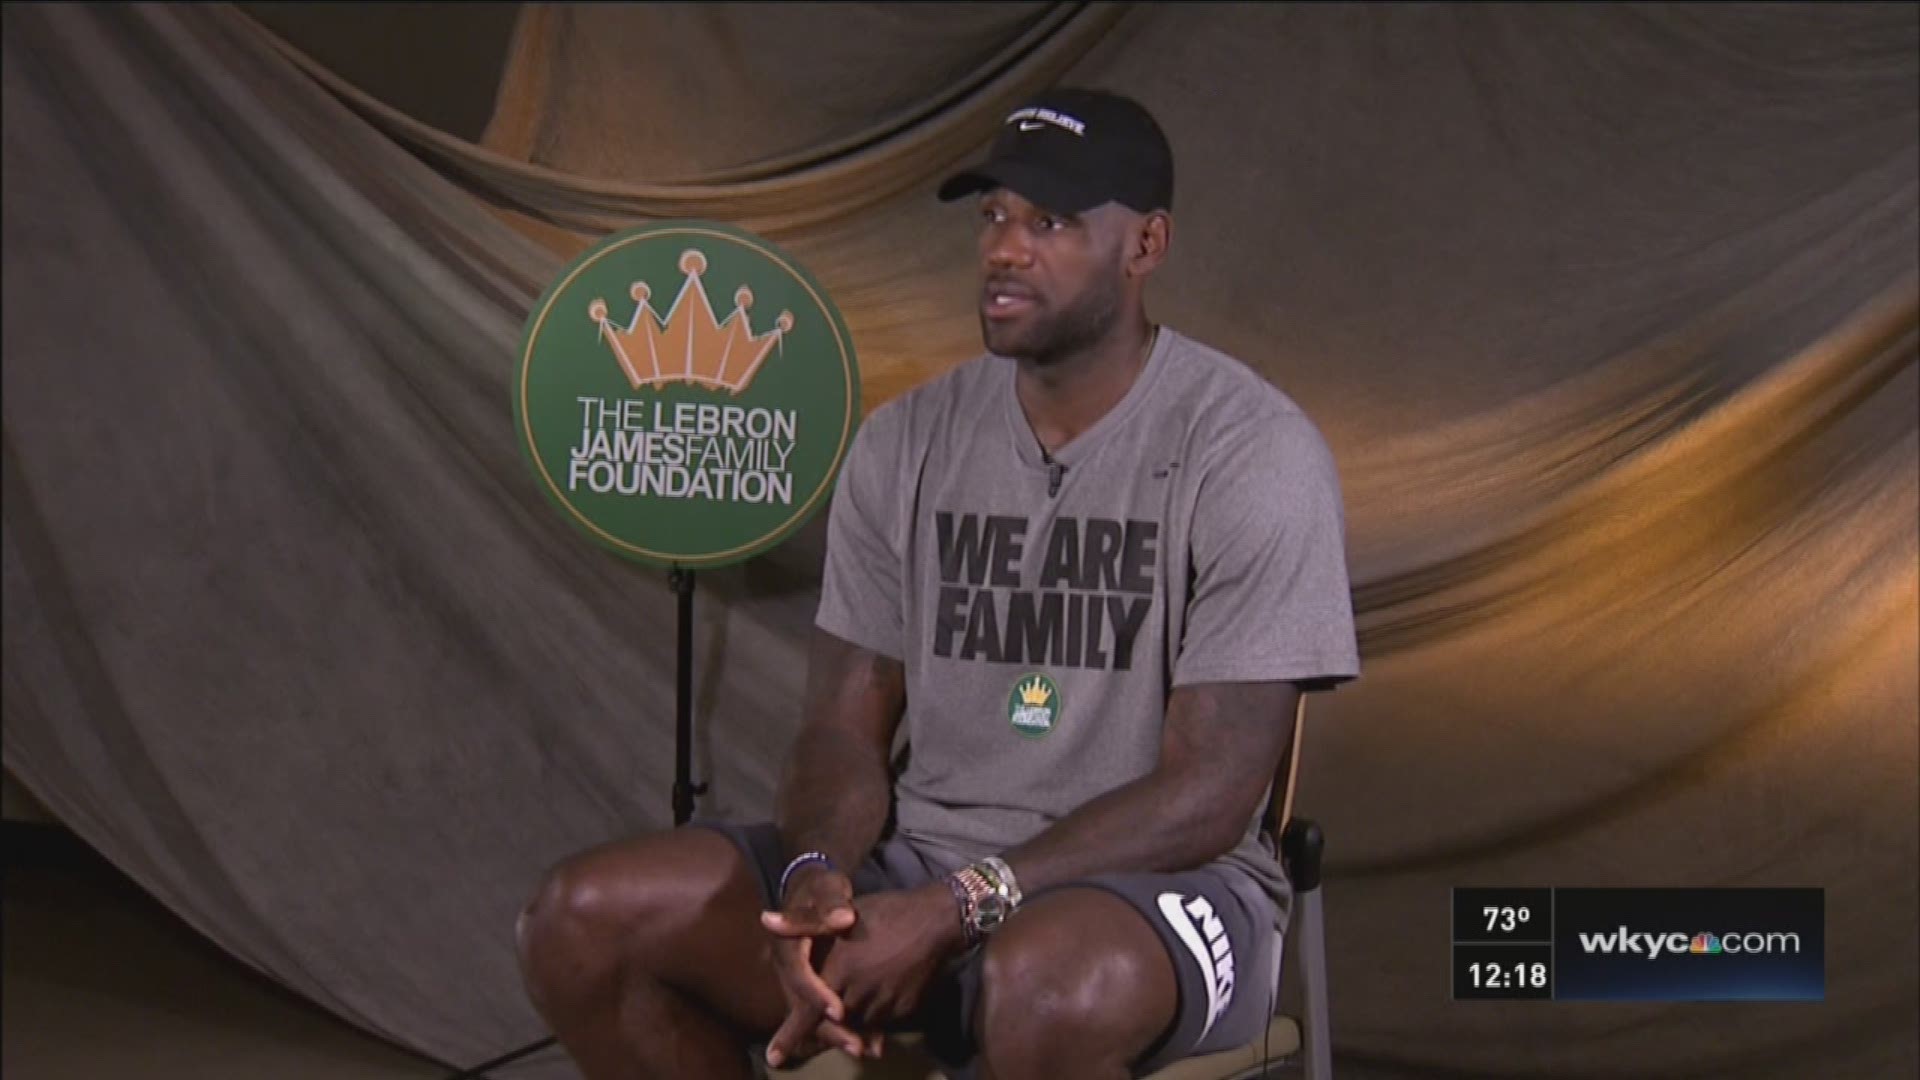 Aug. 17, 2016: WKYC's Jim Donovan sat down this week with Cavs MVP LeBron James for an exclusive interview about the LeBron James Family Foundation.